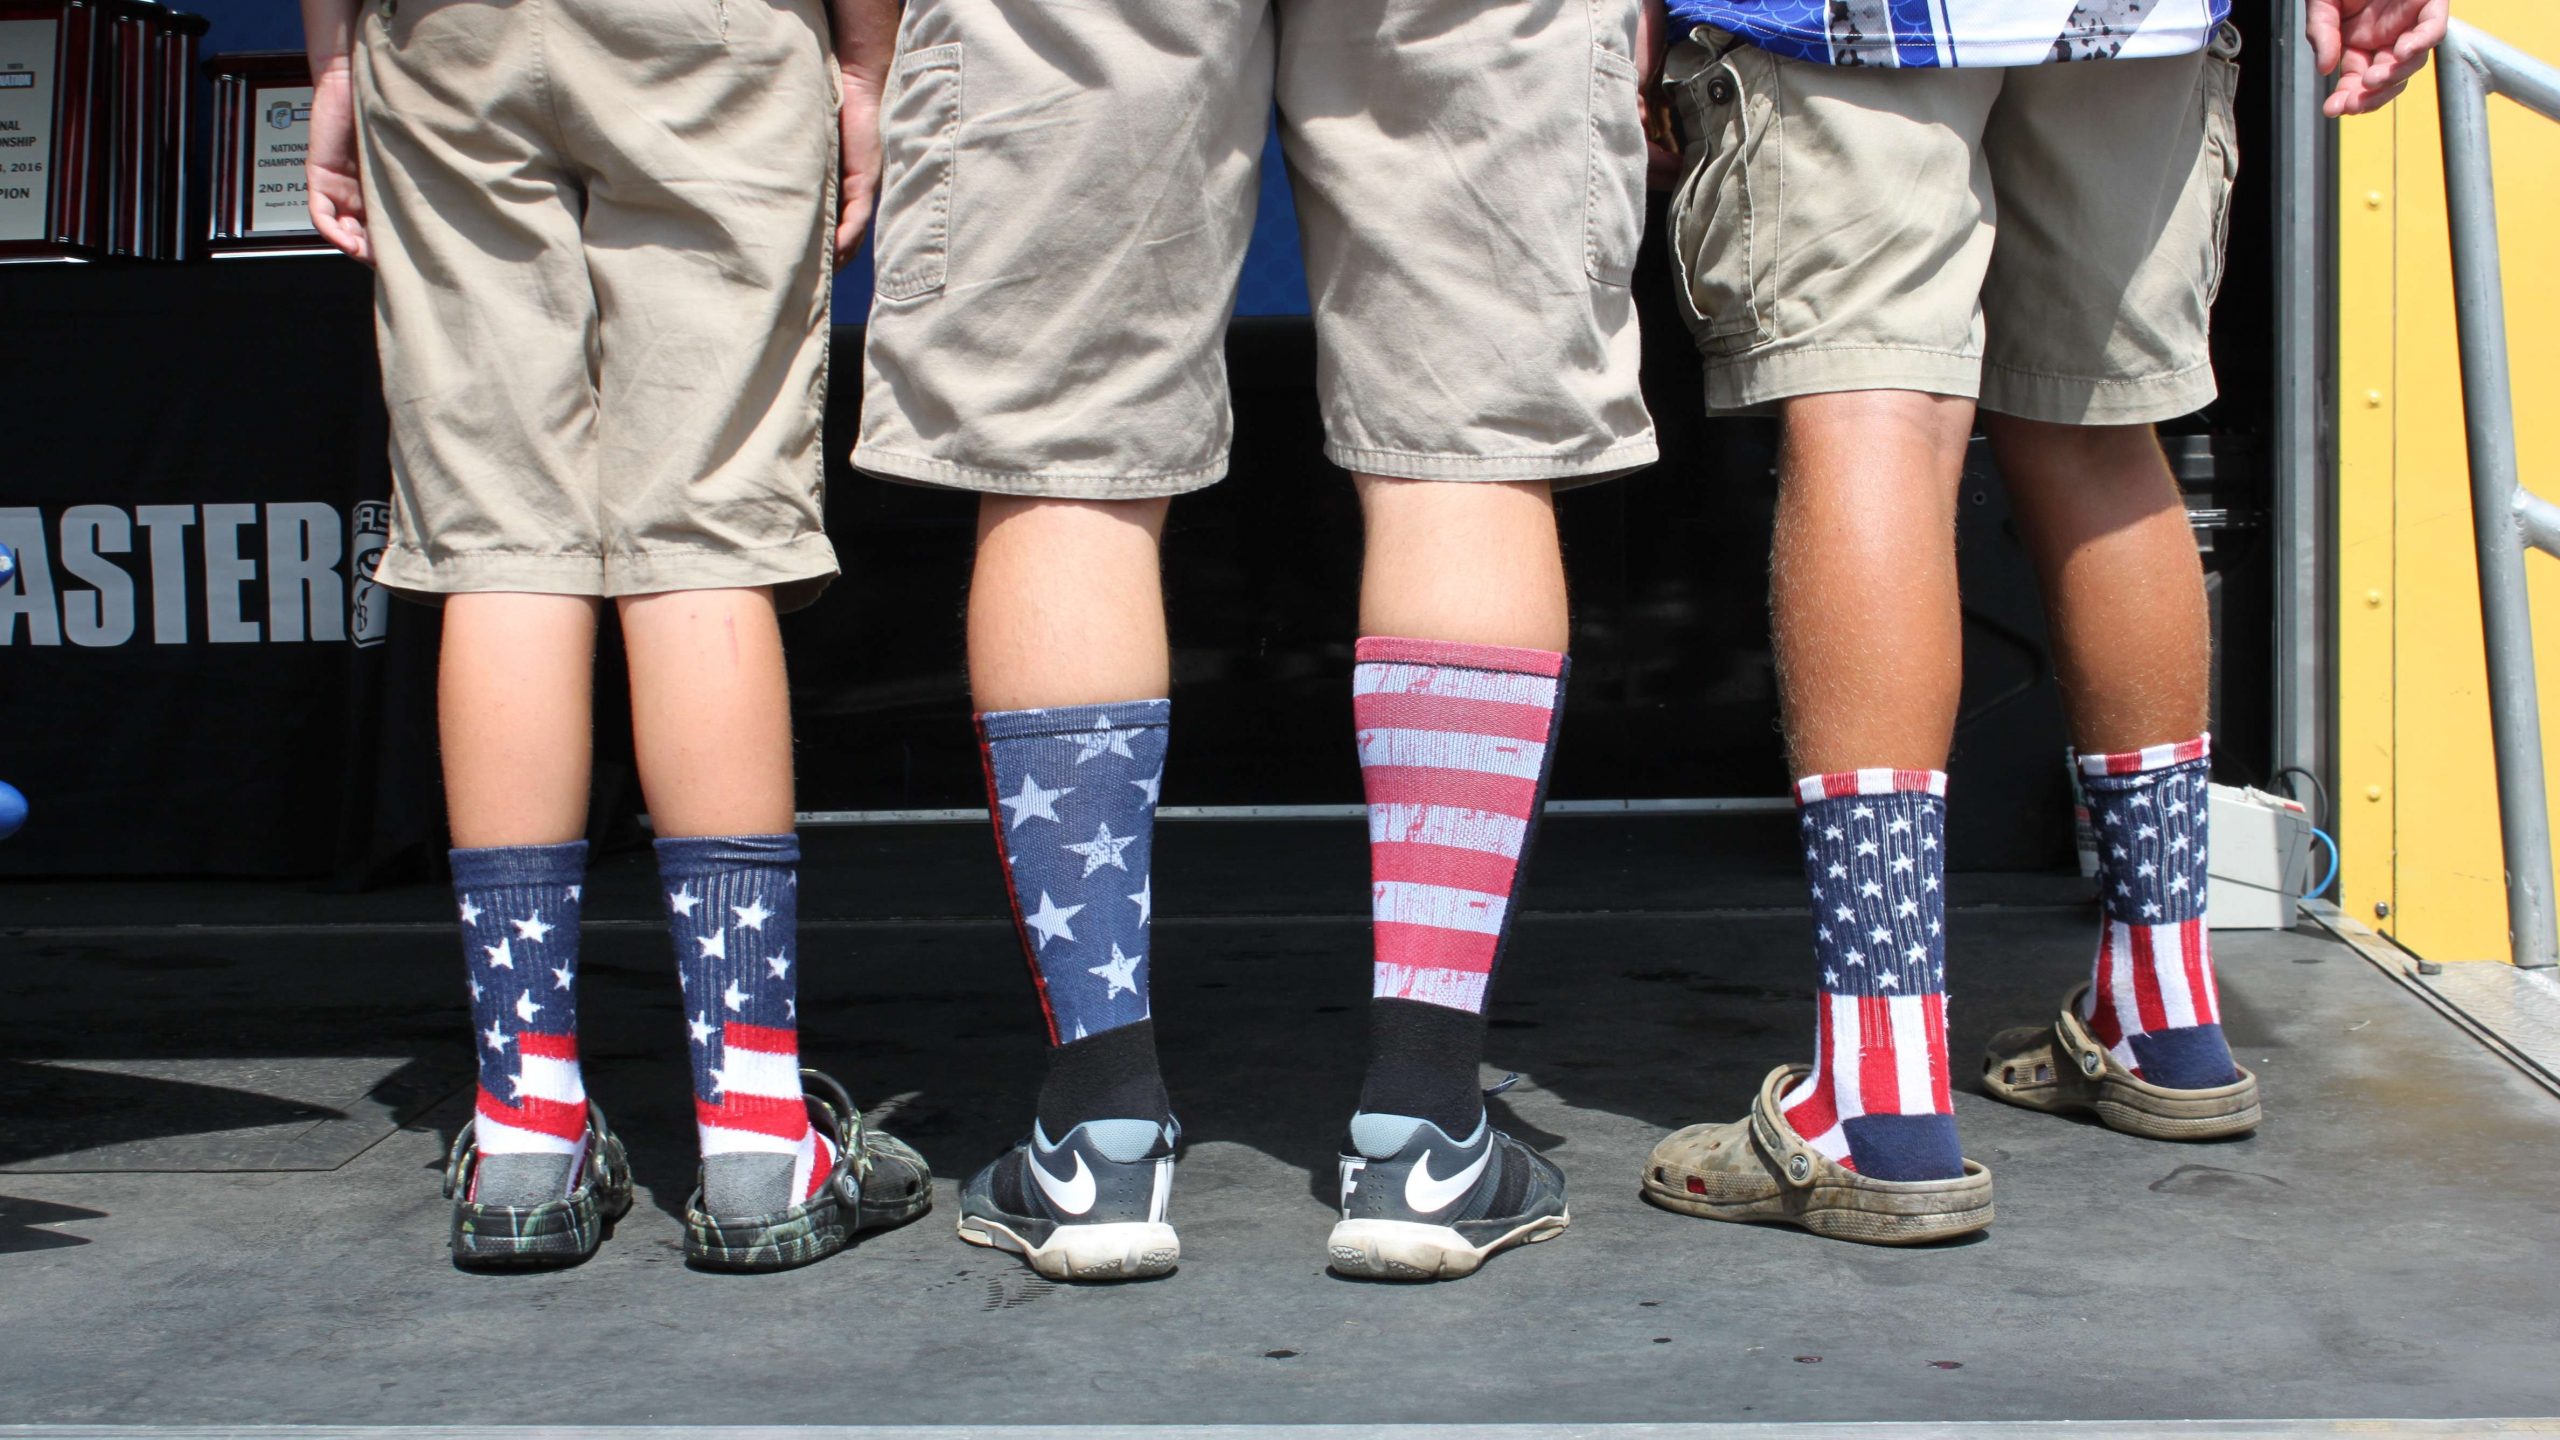 And true to their word, they sported the same American Flag socks they wore on Tuesday. This time, they were joined by B.A.S.S. official Jon Stewart, who also put on some red, white, and blue footwear.